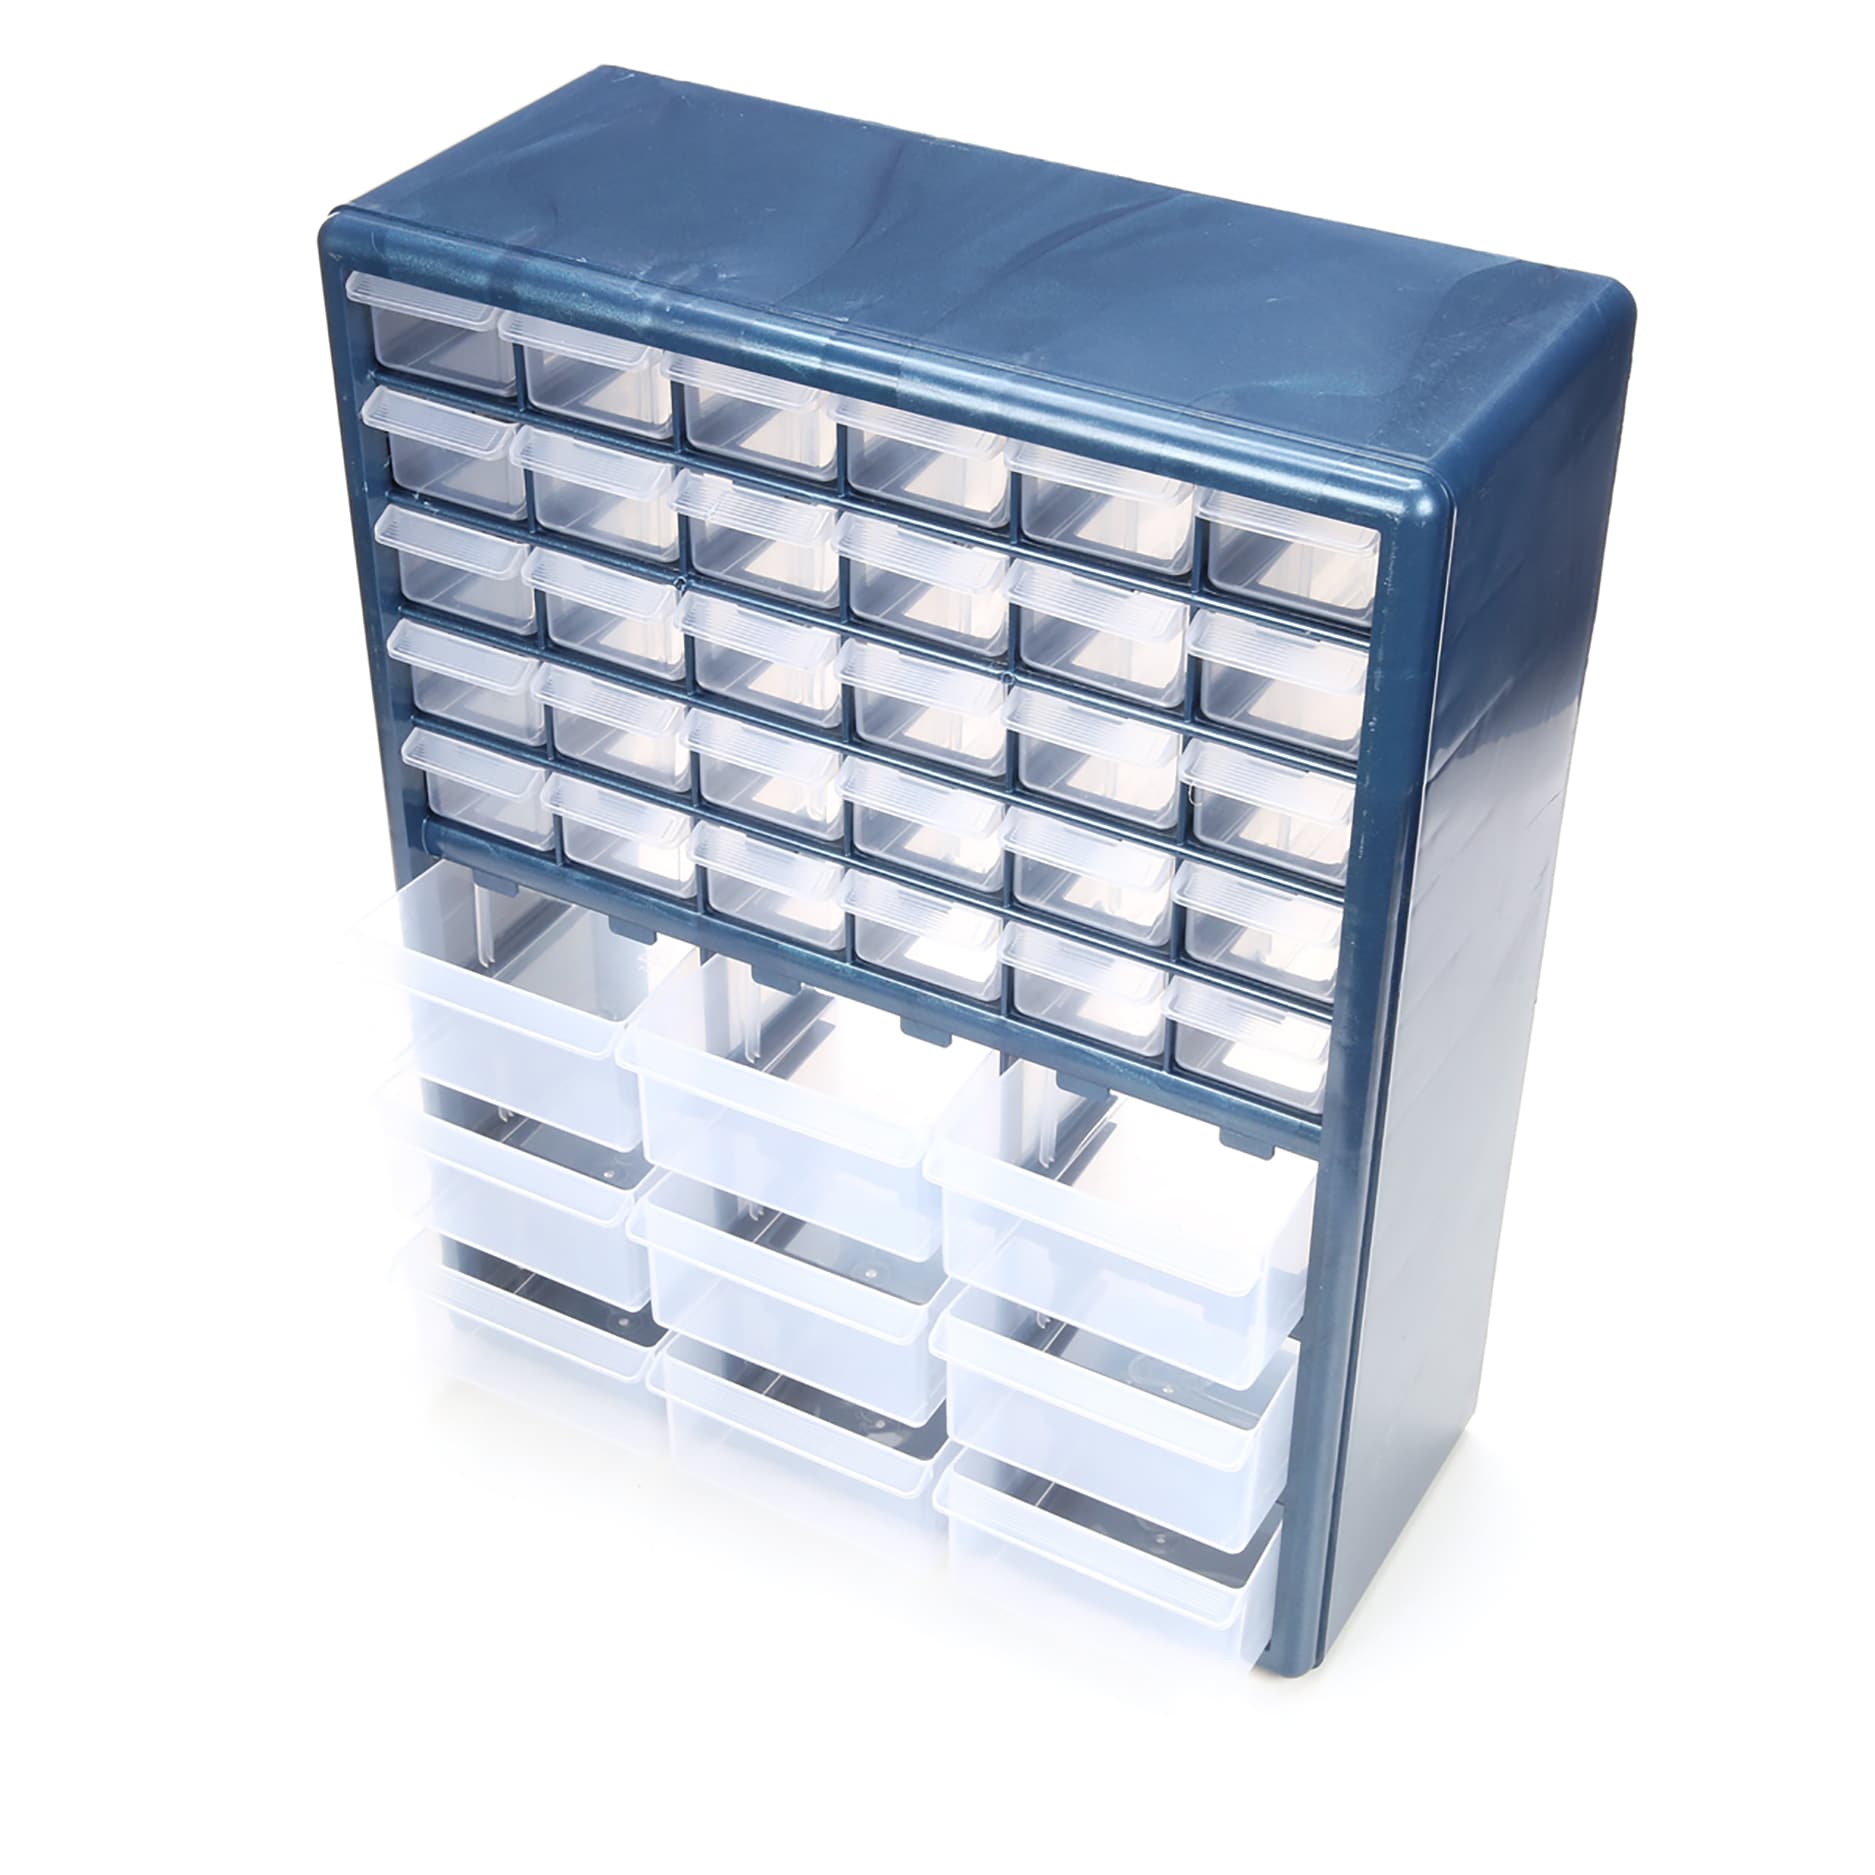 Aadvay Net Enterprises Drawers Component Organisers [Aco] With Multiple  Drawers For Small Parts Storage (39 Drawers)